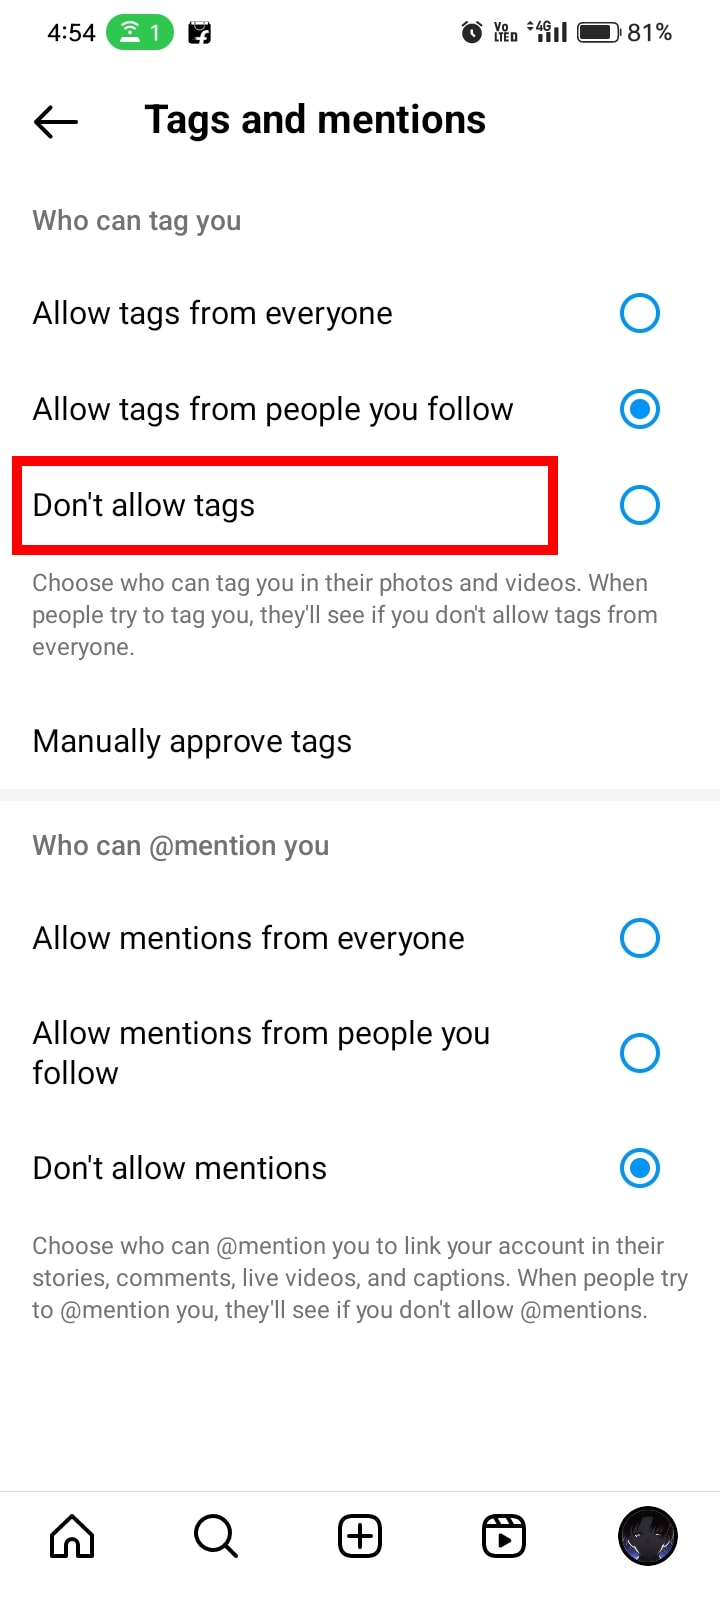 Under the Who can tag you section, tap on Don't allow tags if you don't want anyone to tag you.